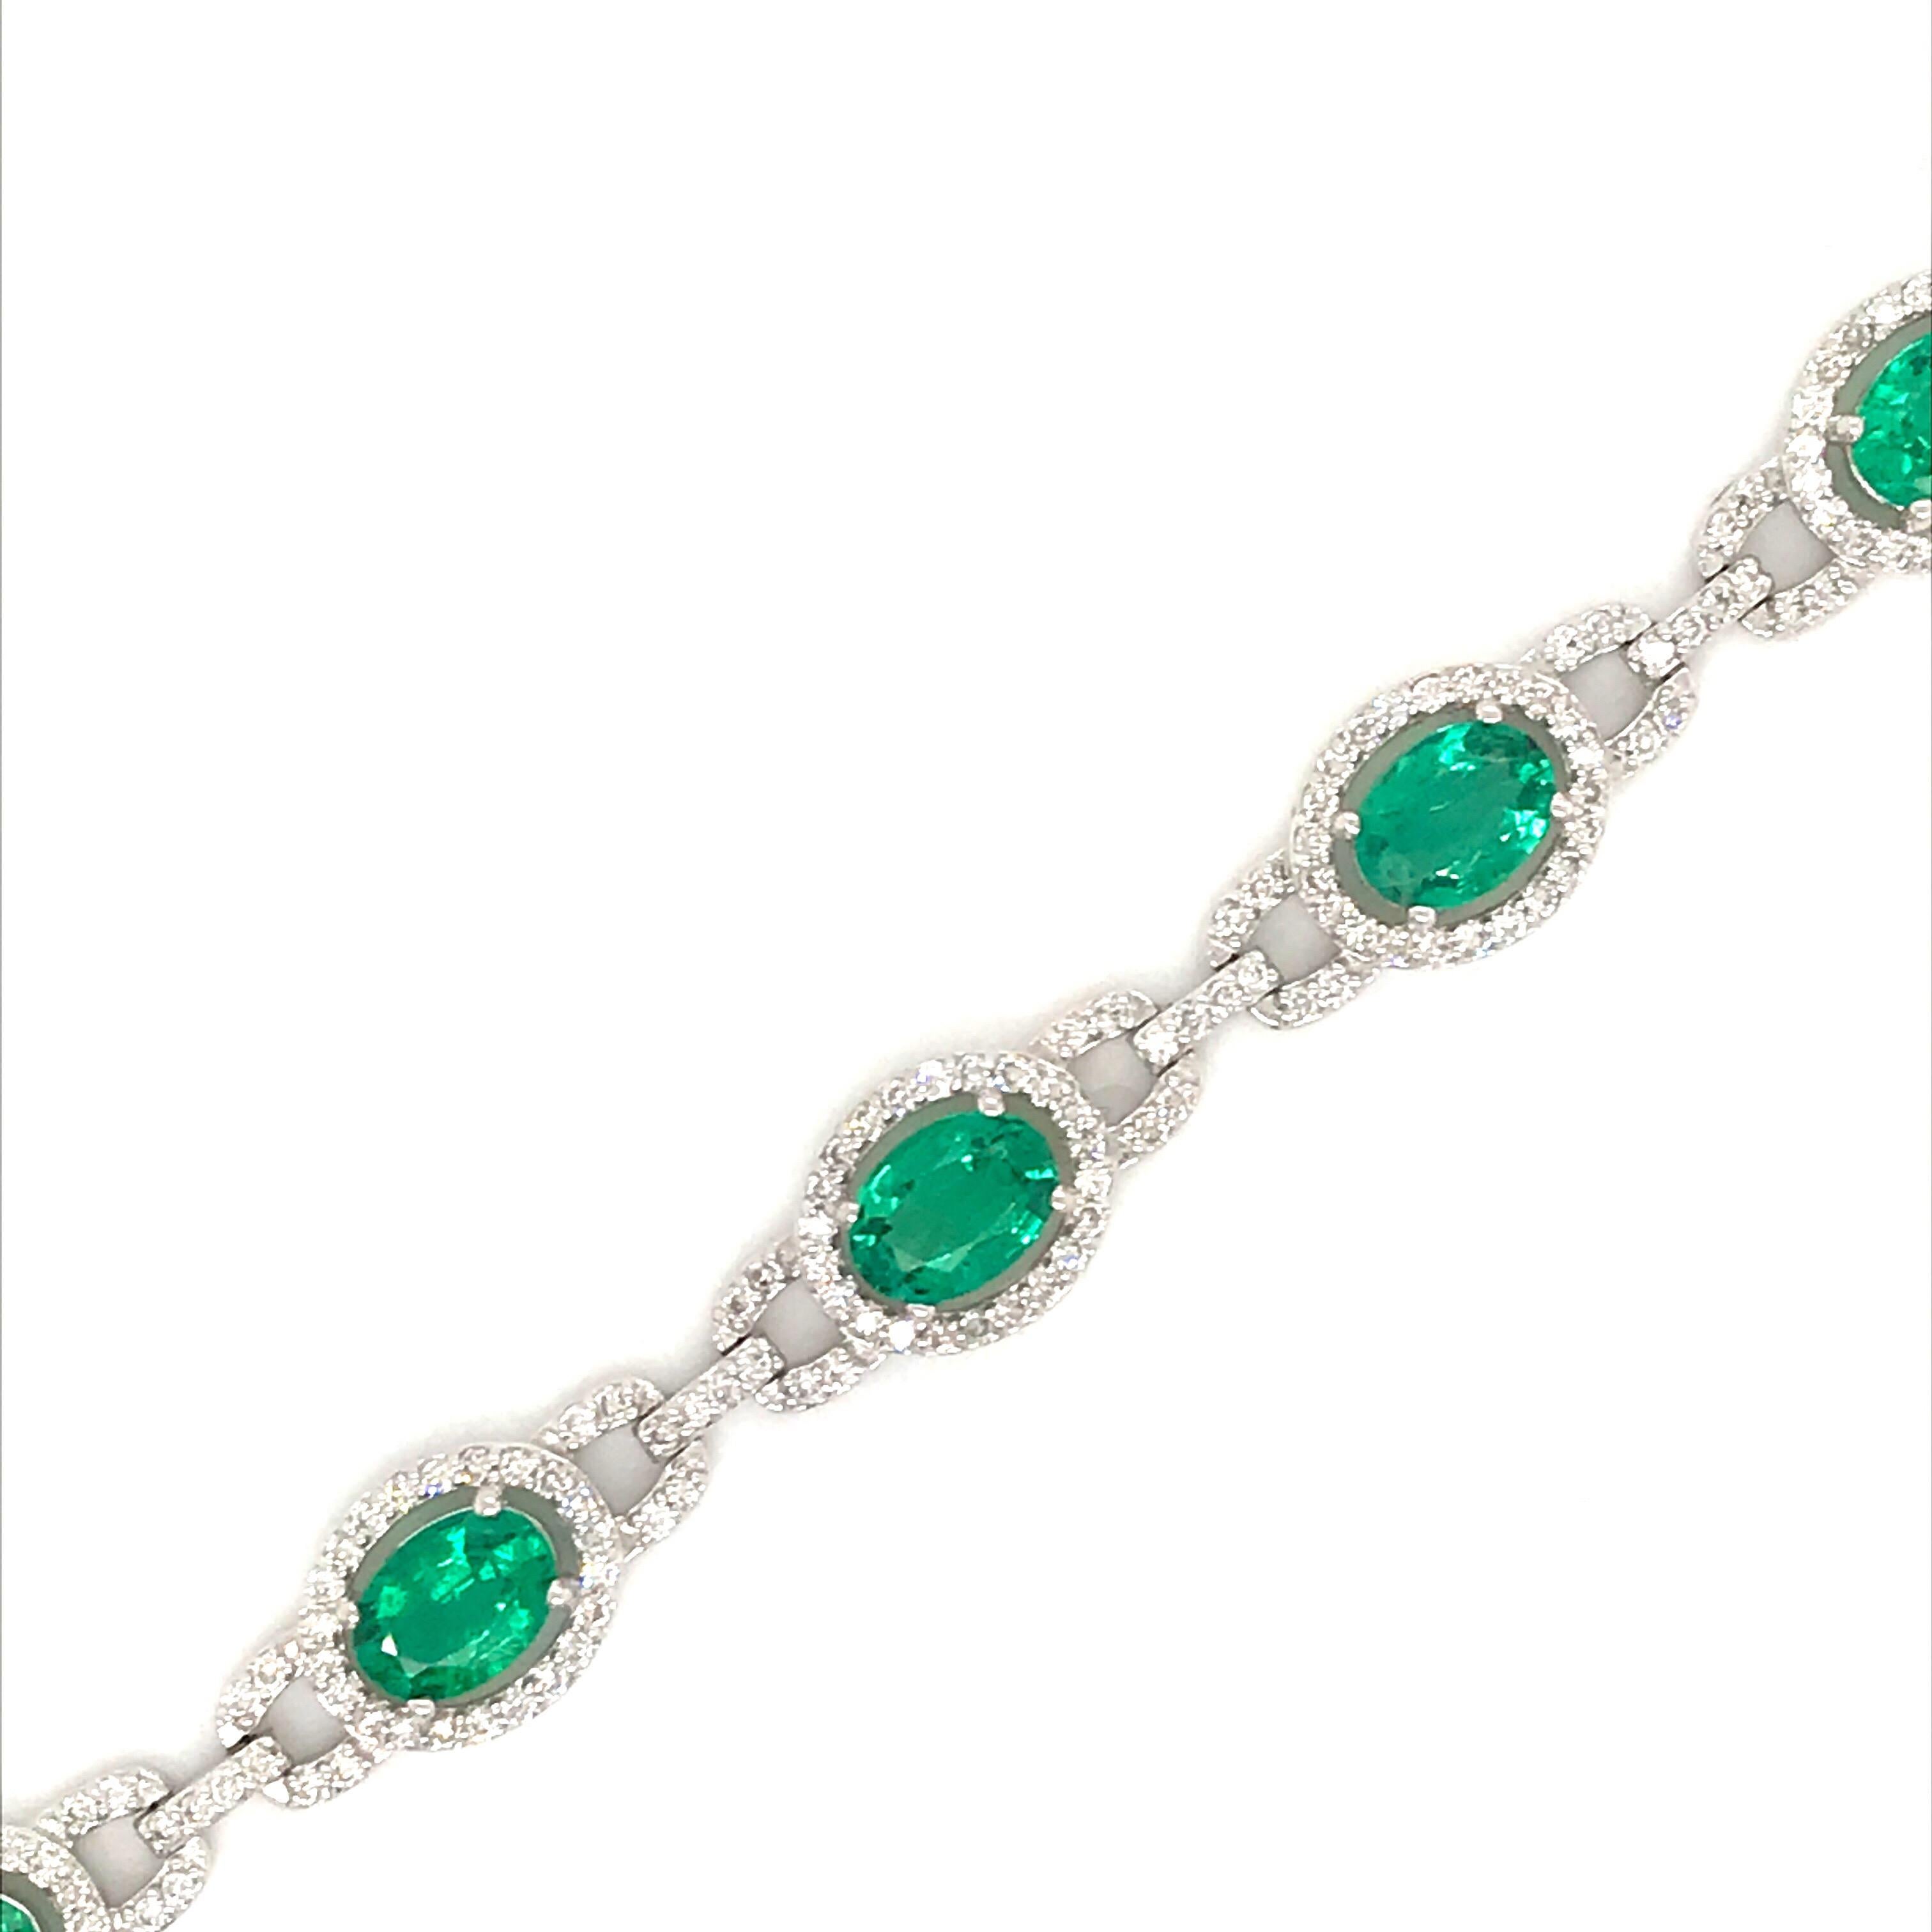 18K White gold bracelet featuring 9 green oval cut emeralds weighing 6.94 caras and 306 round brilliants weighing 2.10 carats.
Color G-H
Clarity SI